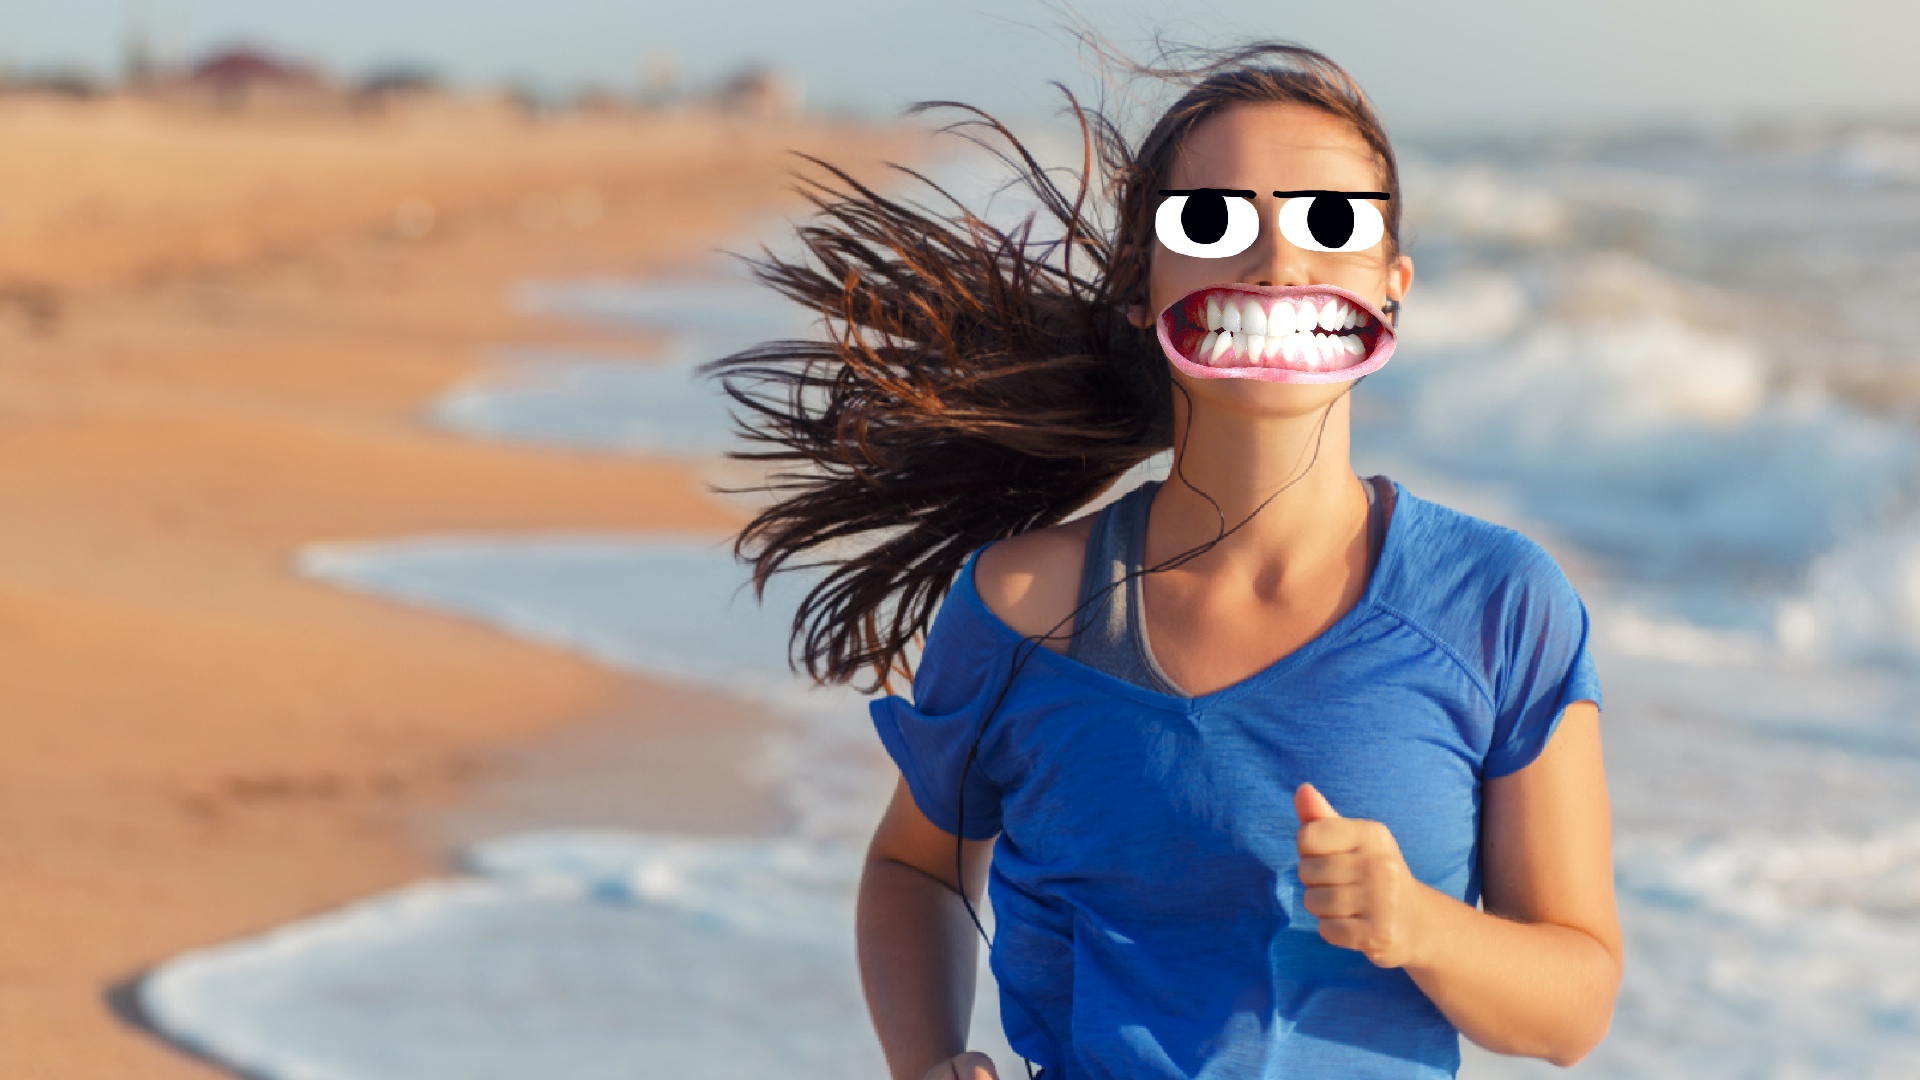 30 Best Running Jokes That Will Have You in Stitches 